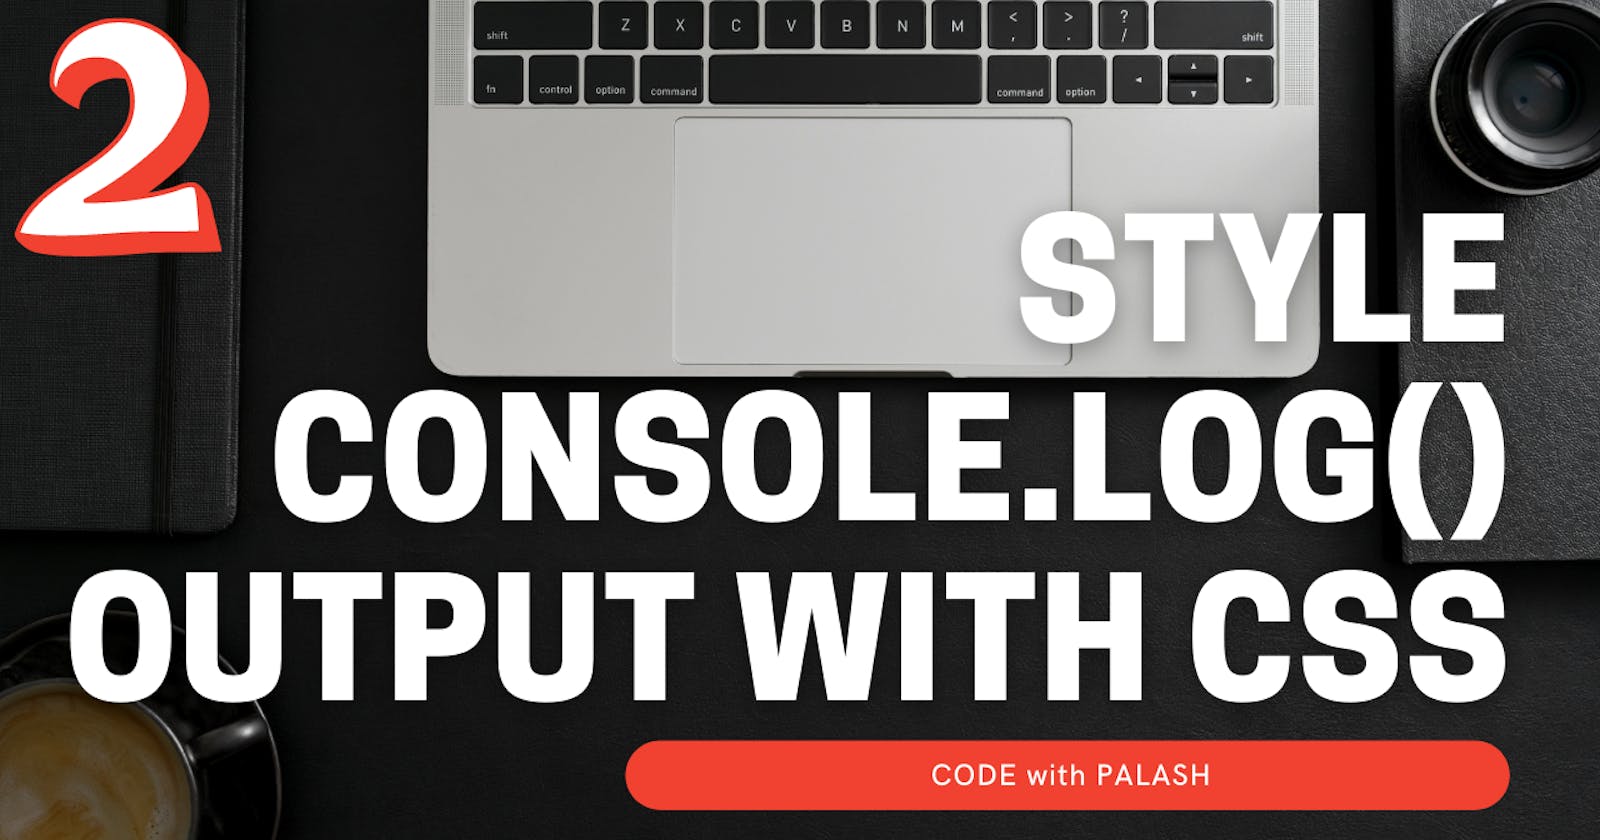 How to style console.log() output with CSS - Part 2